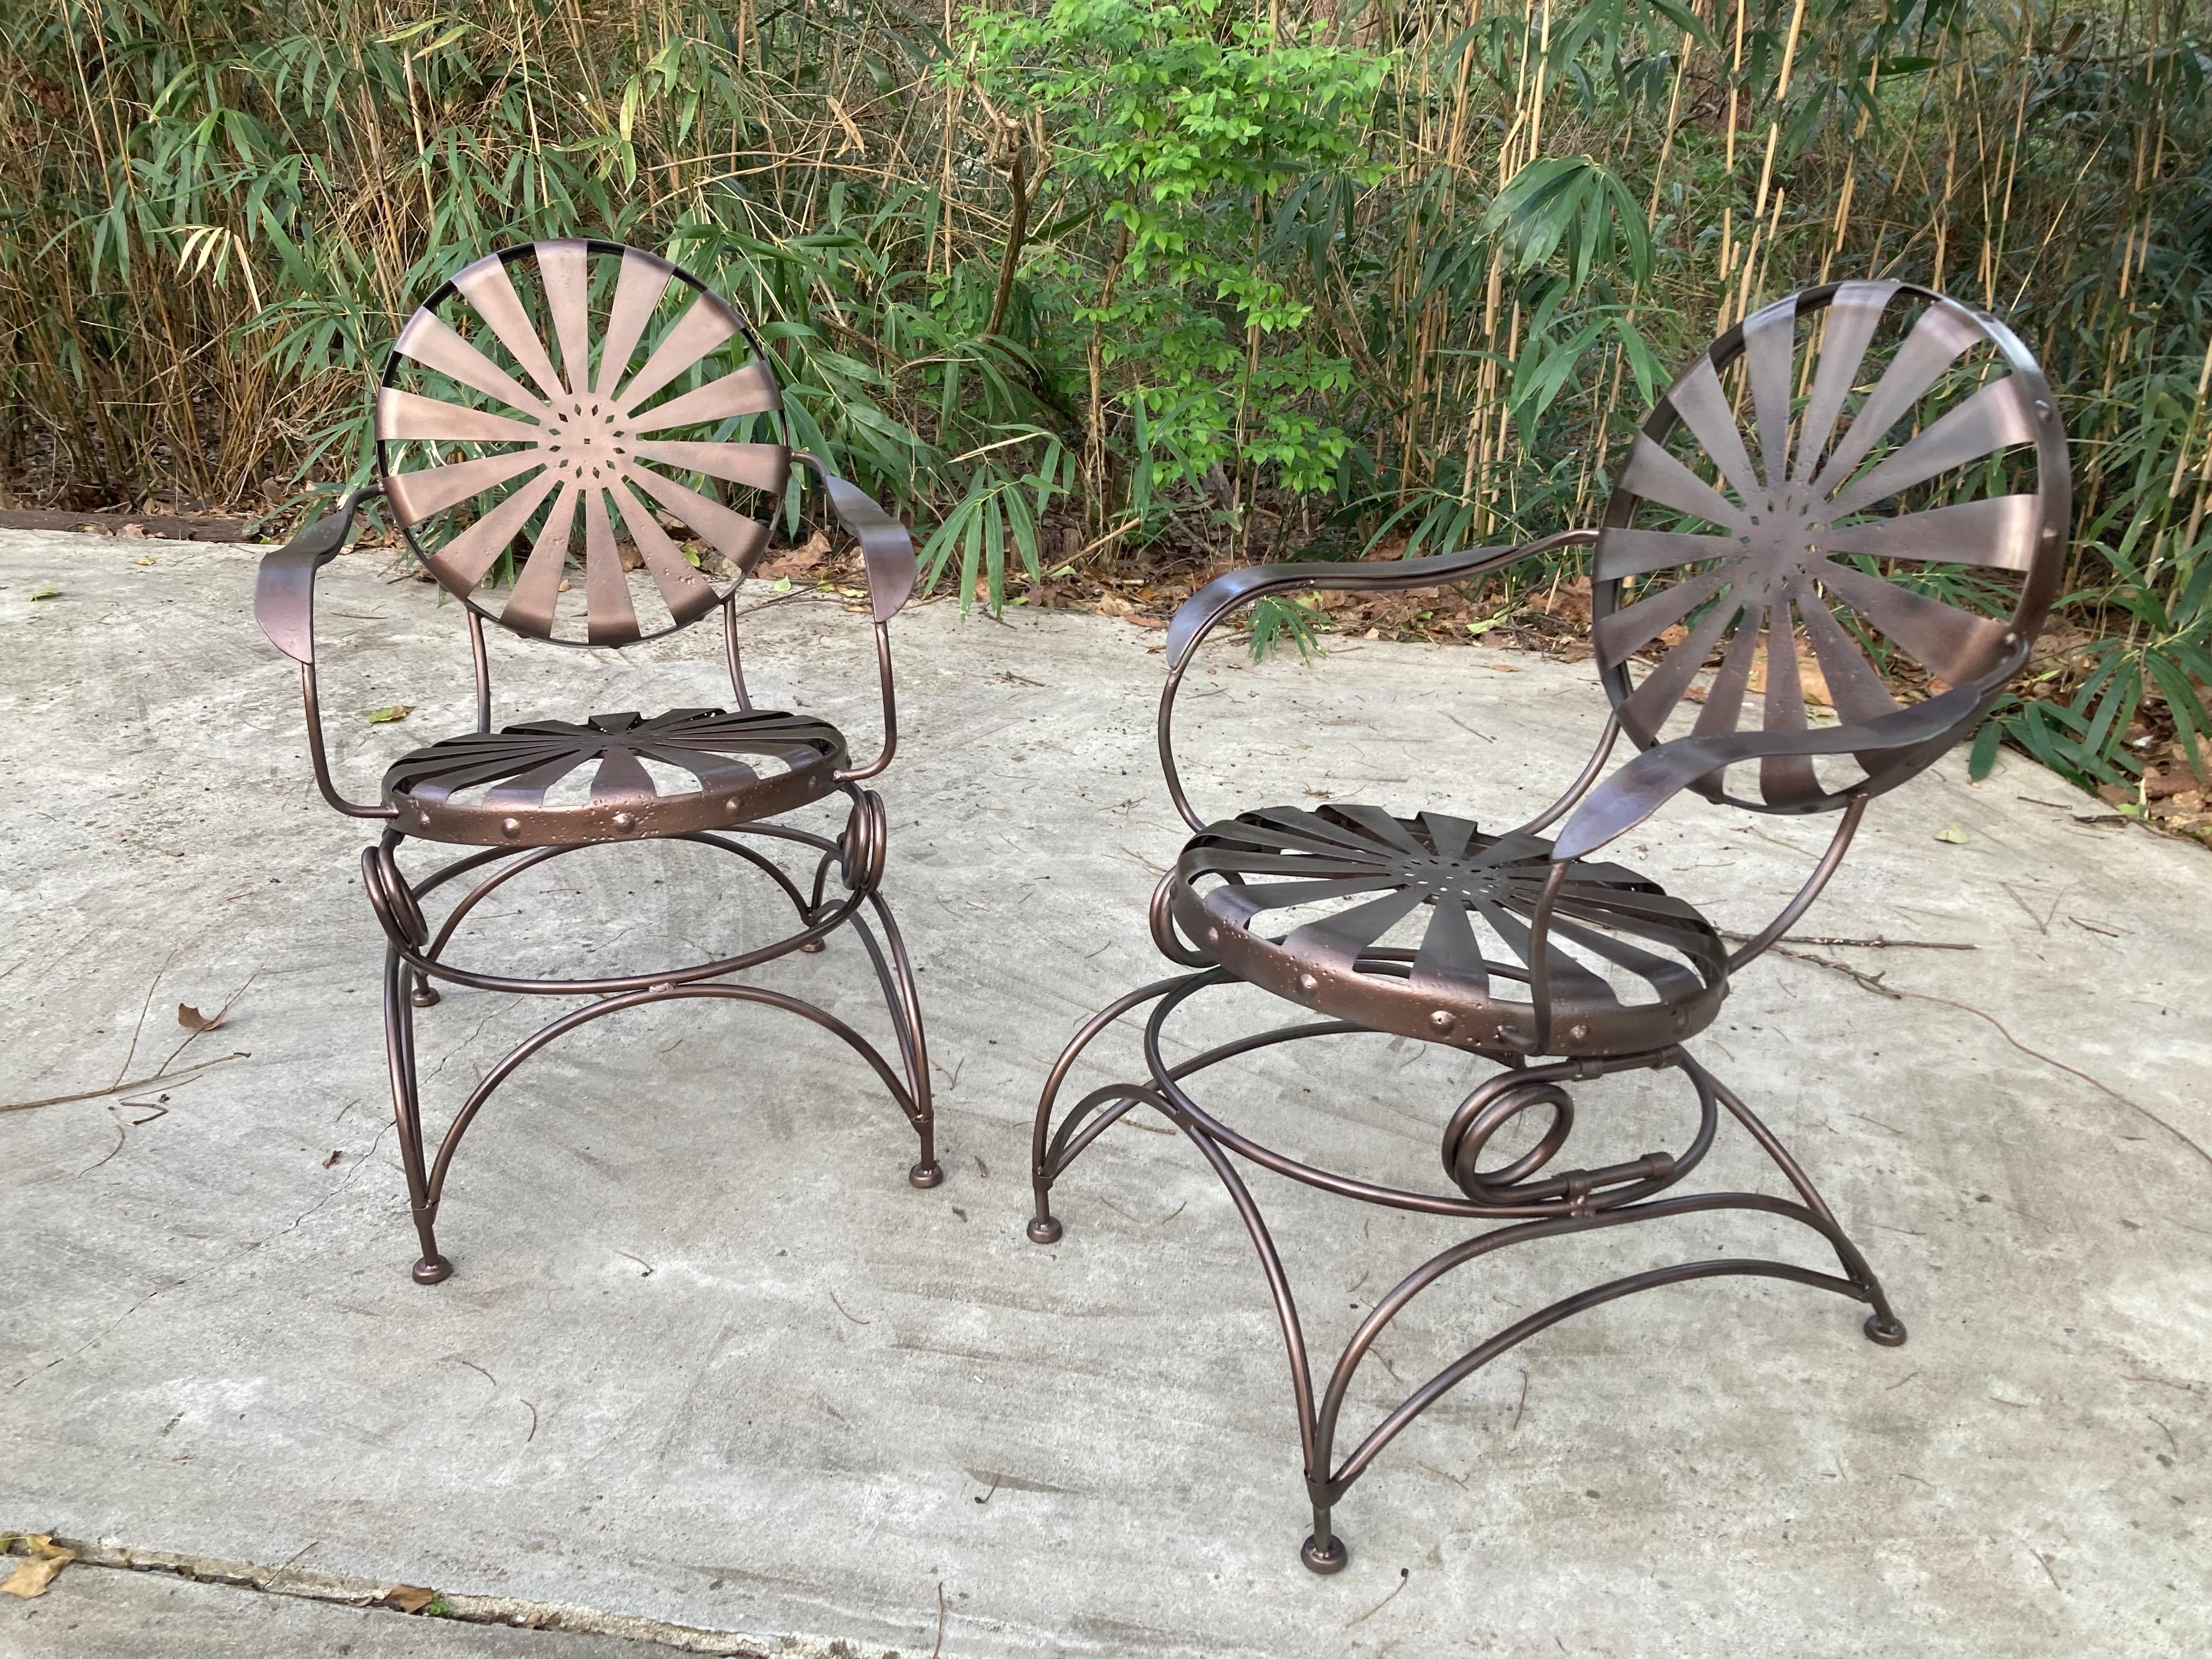 early 20th century carre petite rockers. perfect for the mediterranean garden enthusiast. these have been sandblasted, professional primed and paint in a satin bronzed dark copper hue

no maker’s mark

24 w 25 d 35 tall


shipping from athens, ga